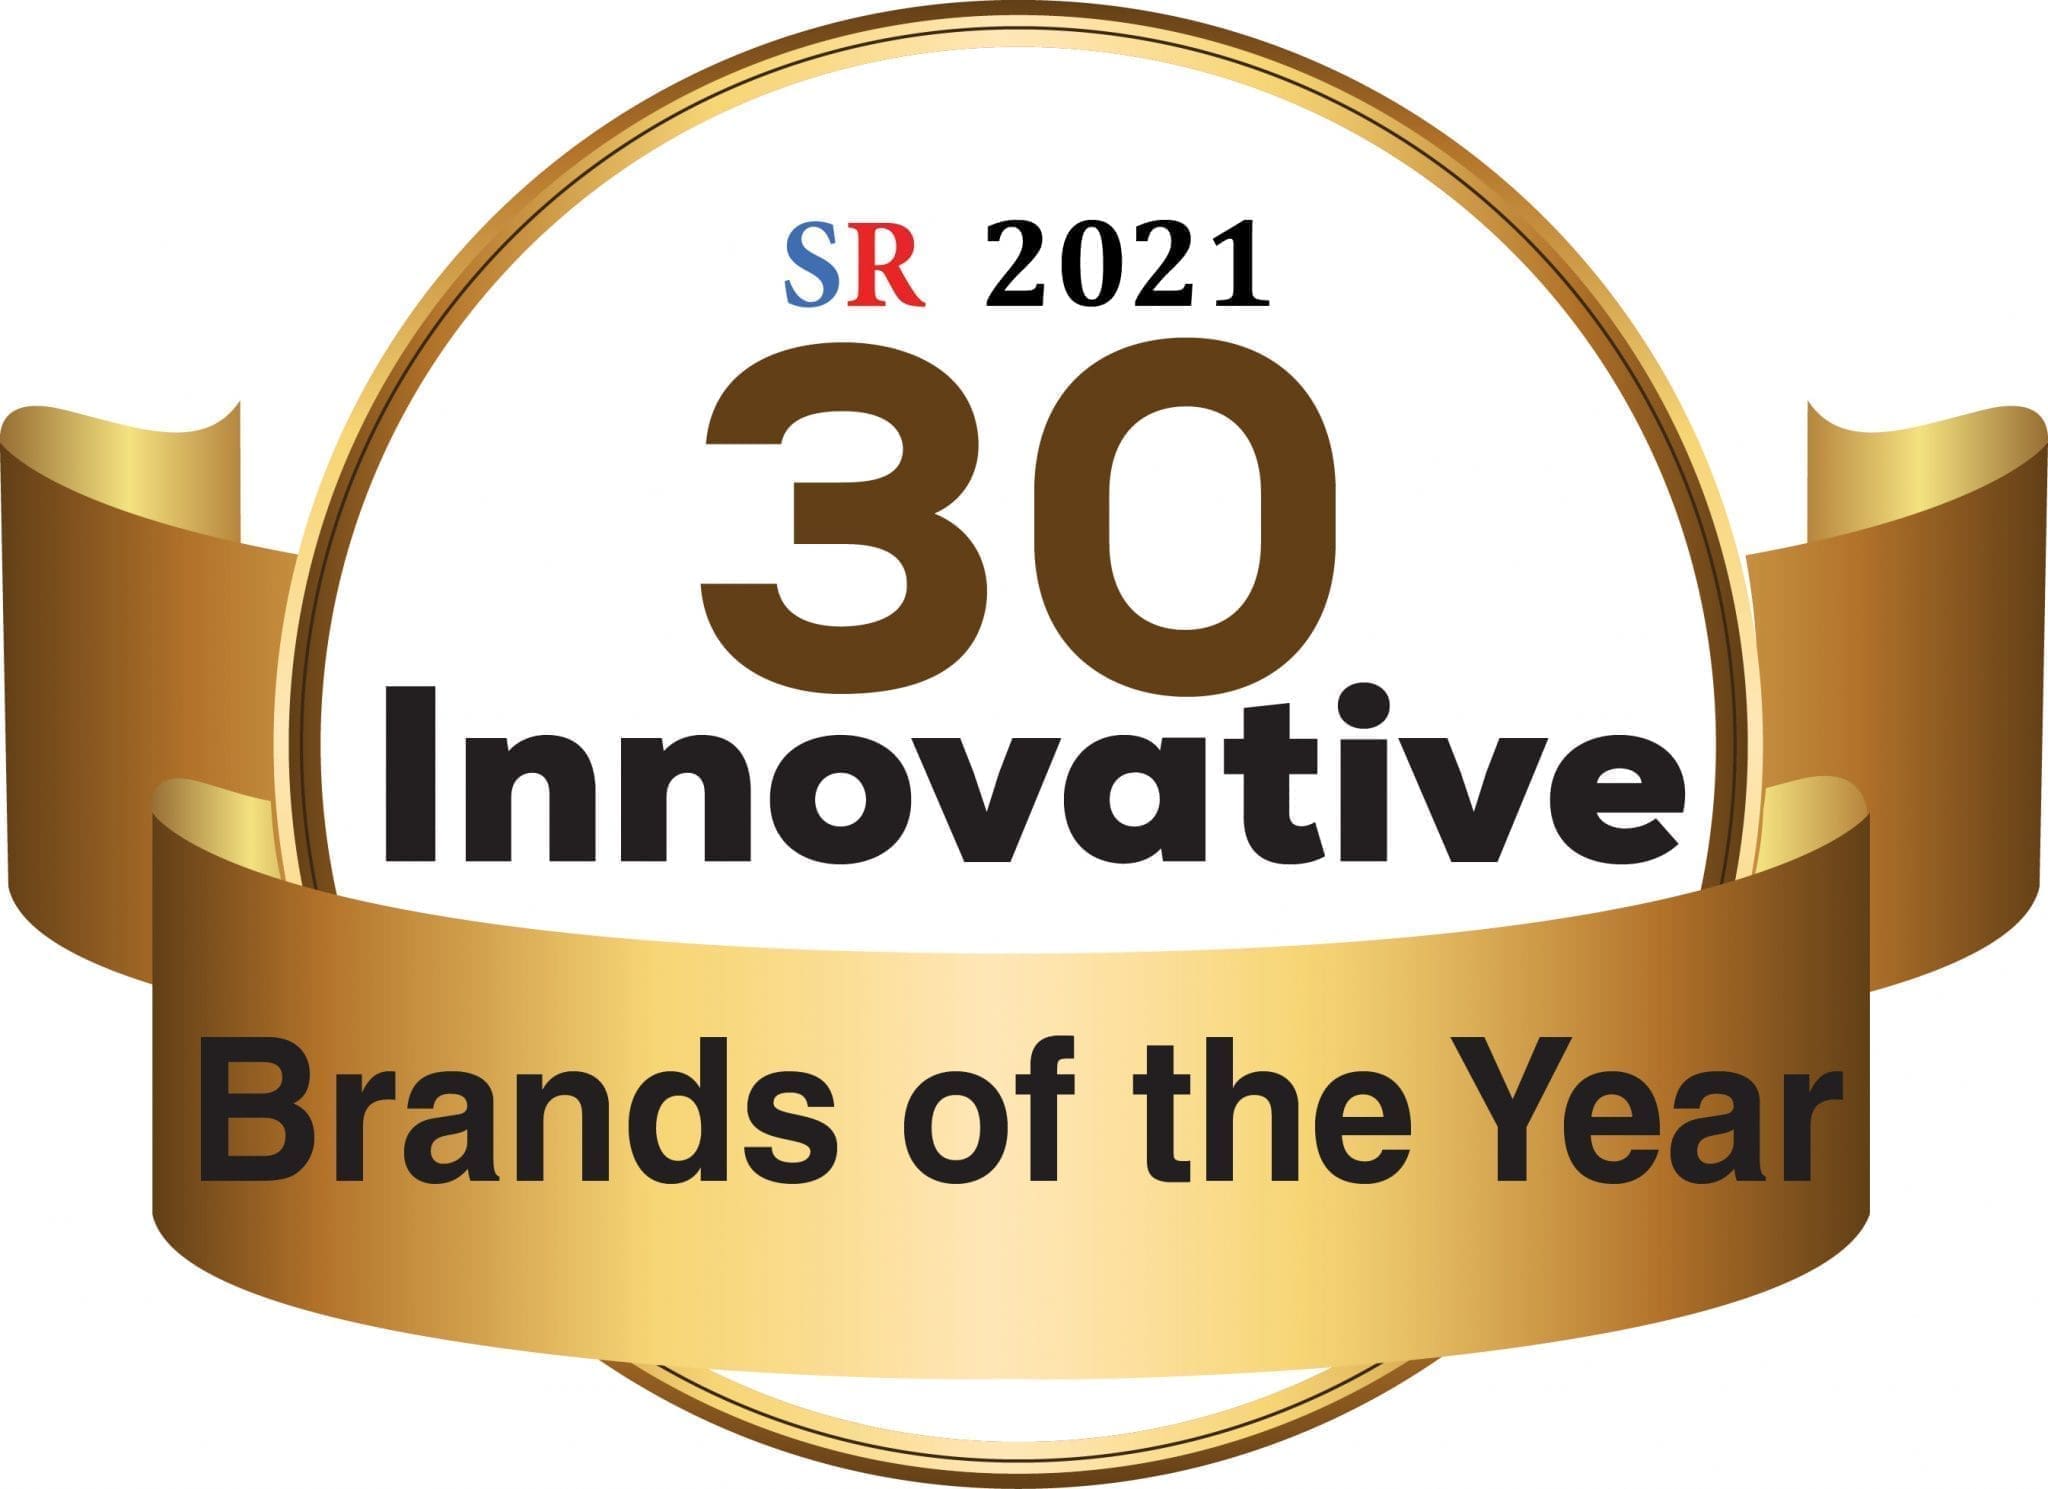 Top 30 Innovative Brands of the Year